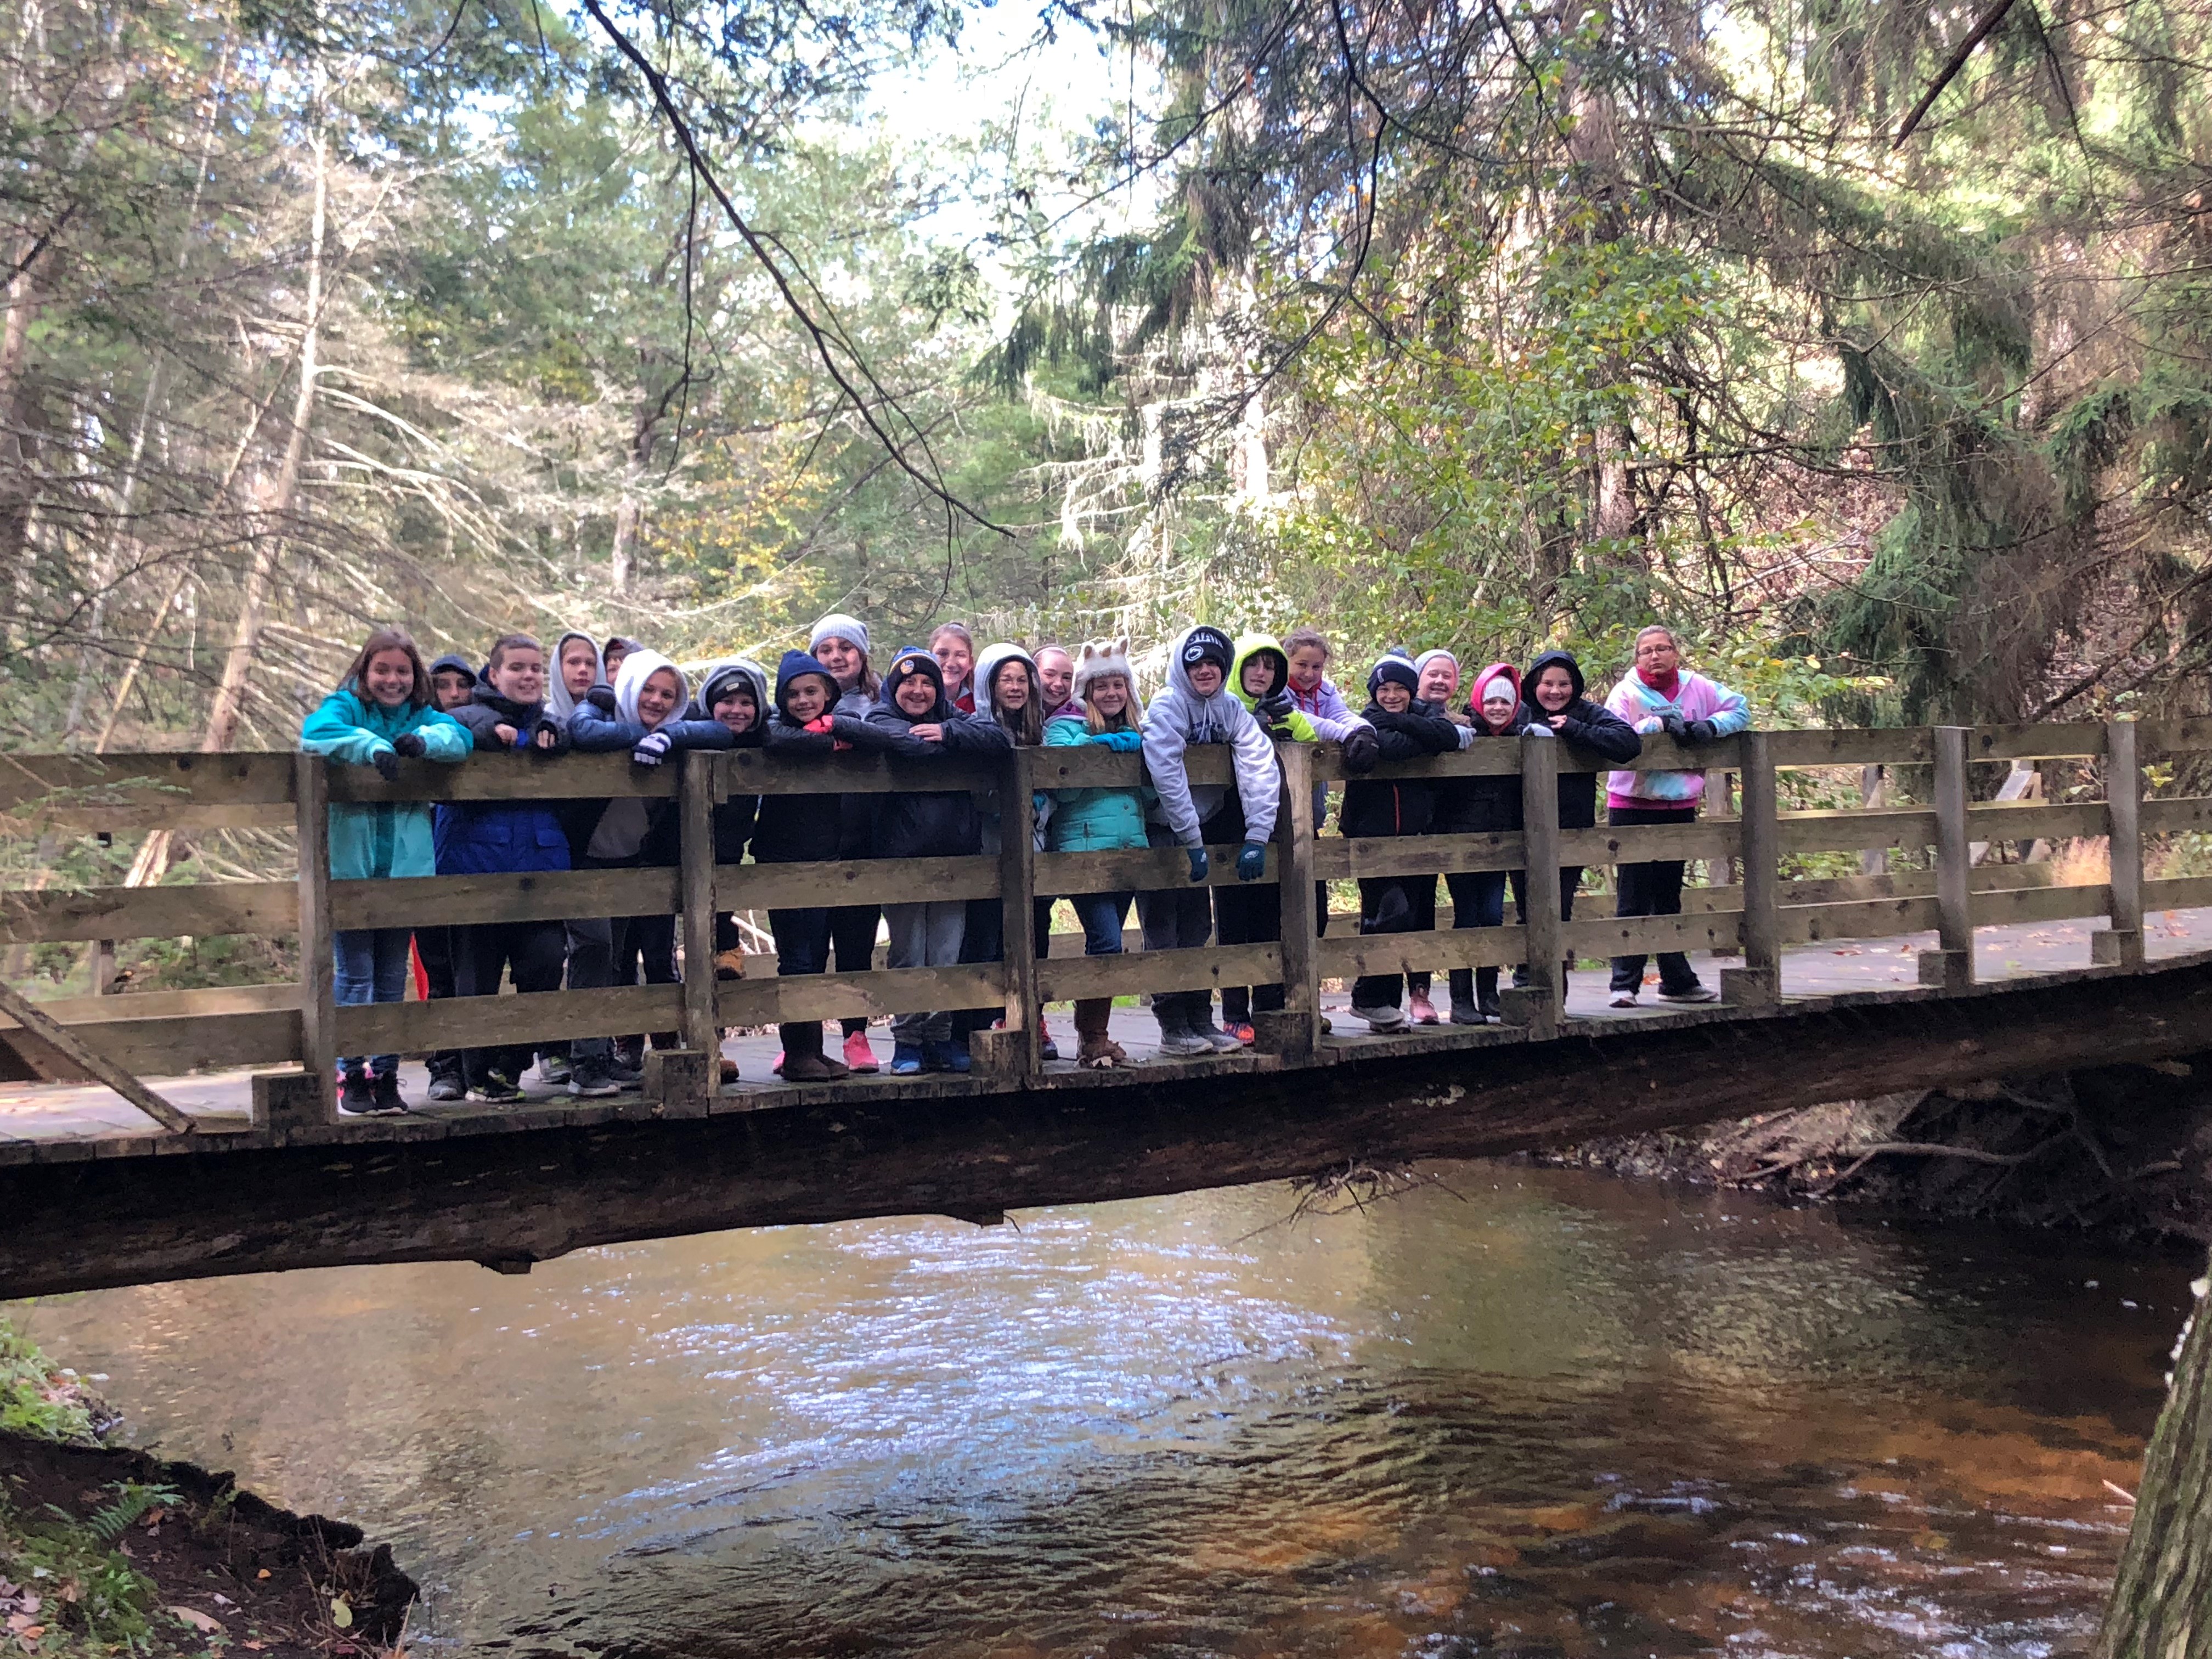 Students pose for a group photo on a bridge over a stream